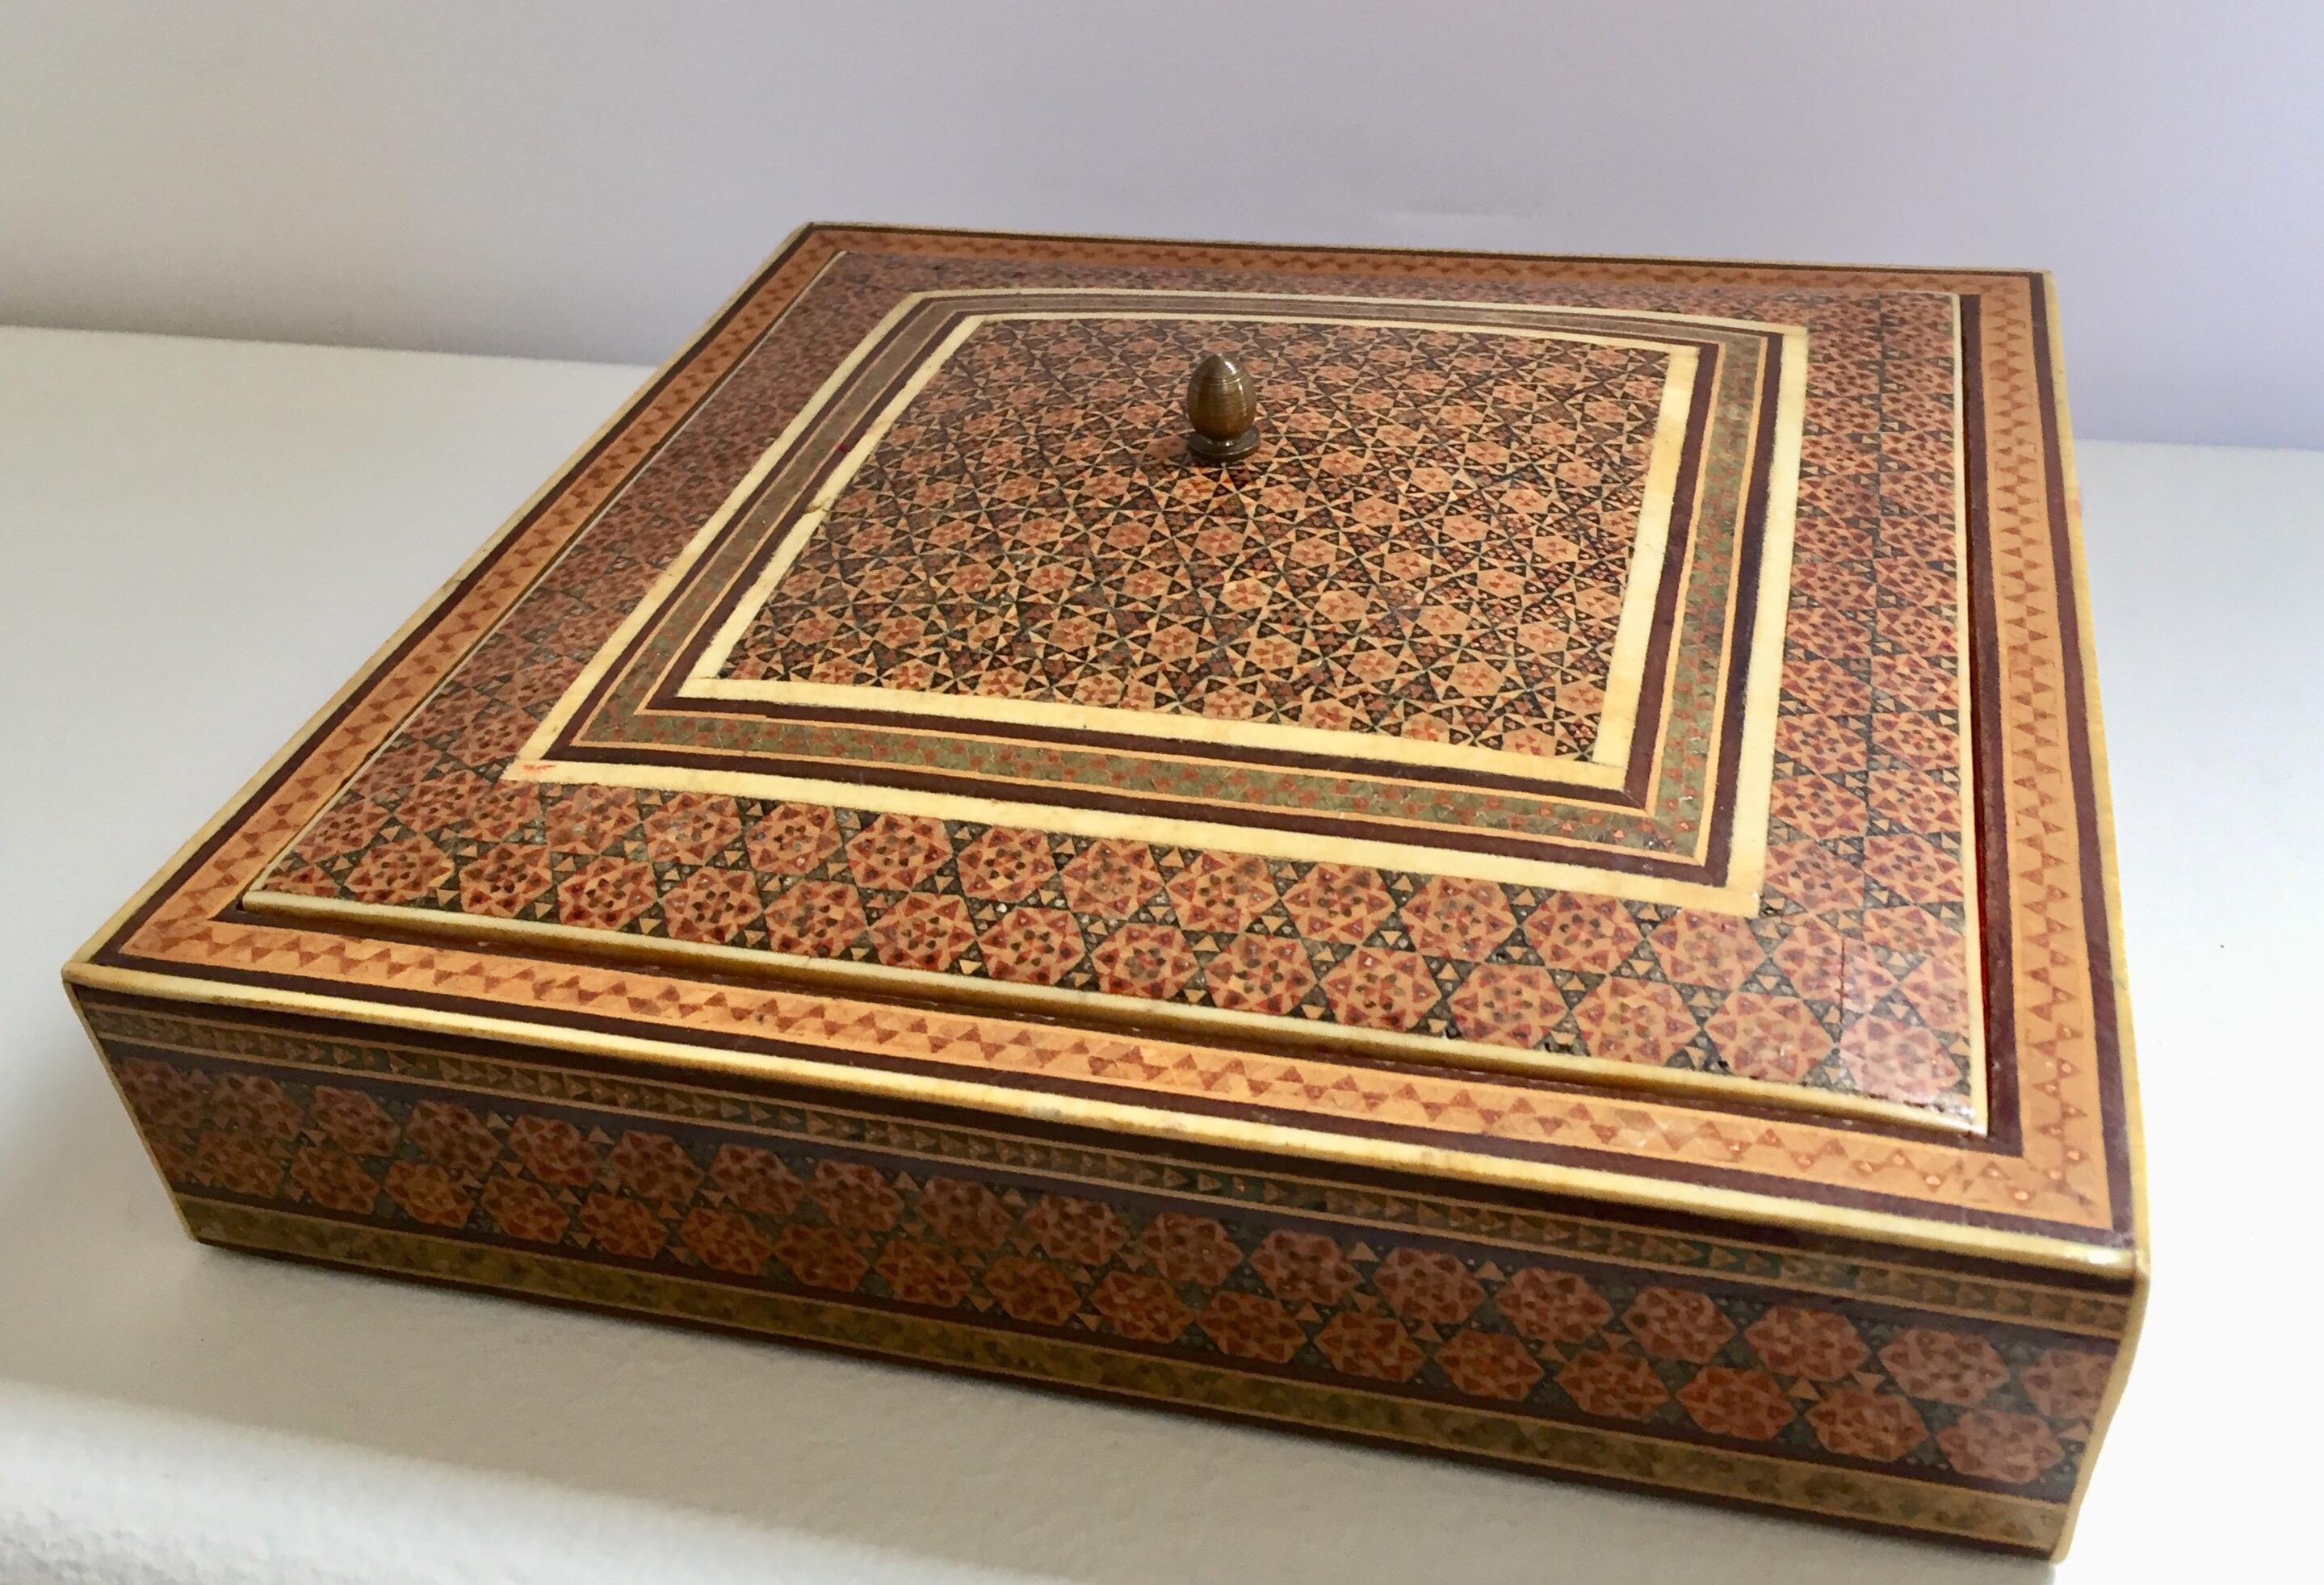 Fine Persian Sadeli micro mosaic inlaid jewelry box with lid.
Intricate inlaid Middle Eastern Persian box with floral and geometric Islamic Moorish design in a rectangular form.
Moorish design bone inlay and marquetry, very fine artwork, lined in